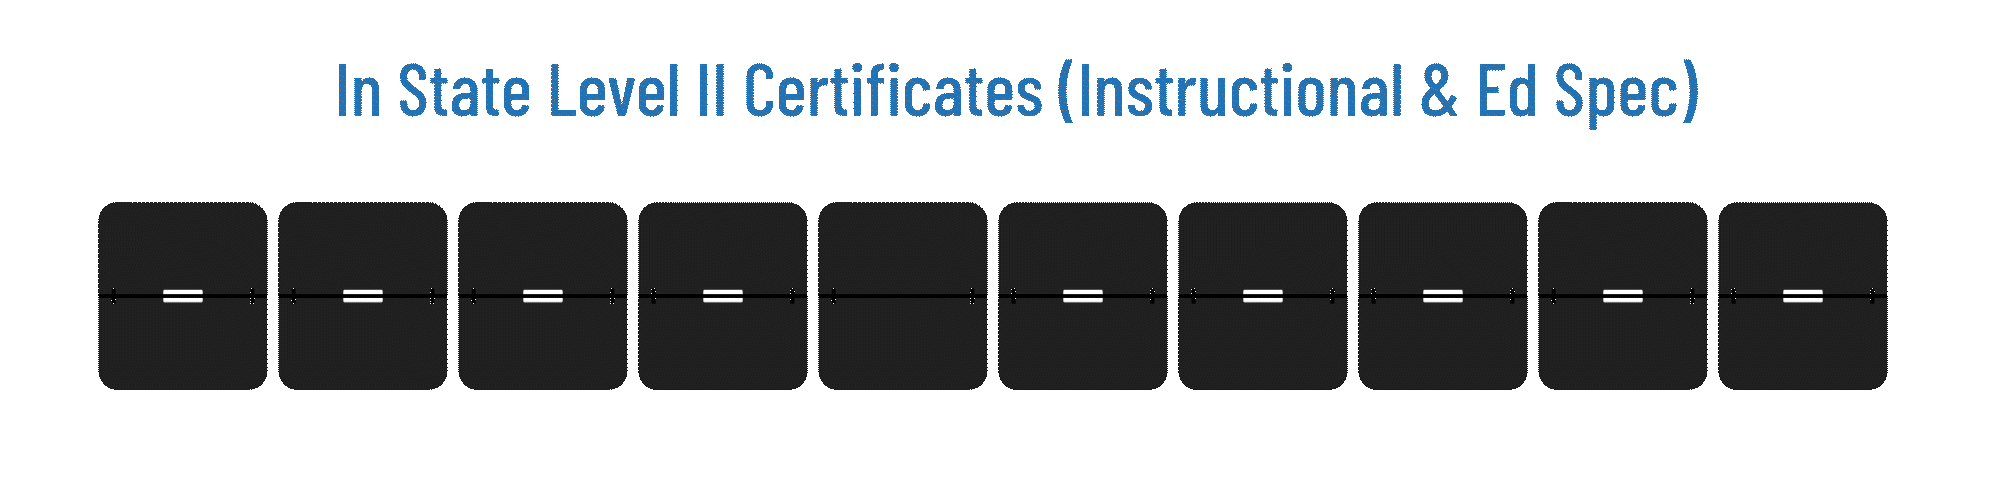 Level II Certificates (Instructional & Ed Spec) - Less than 3 weeks